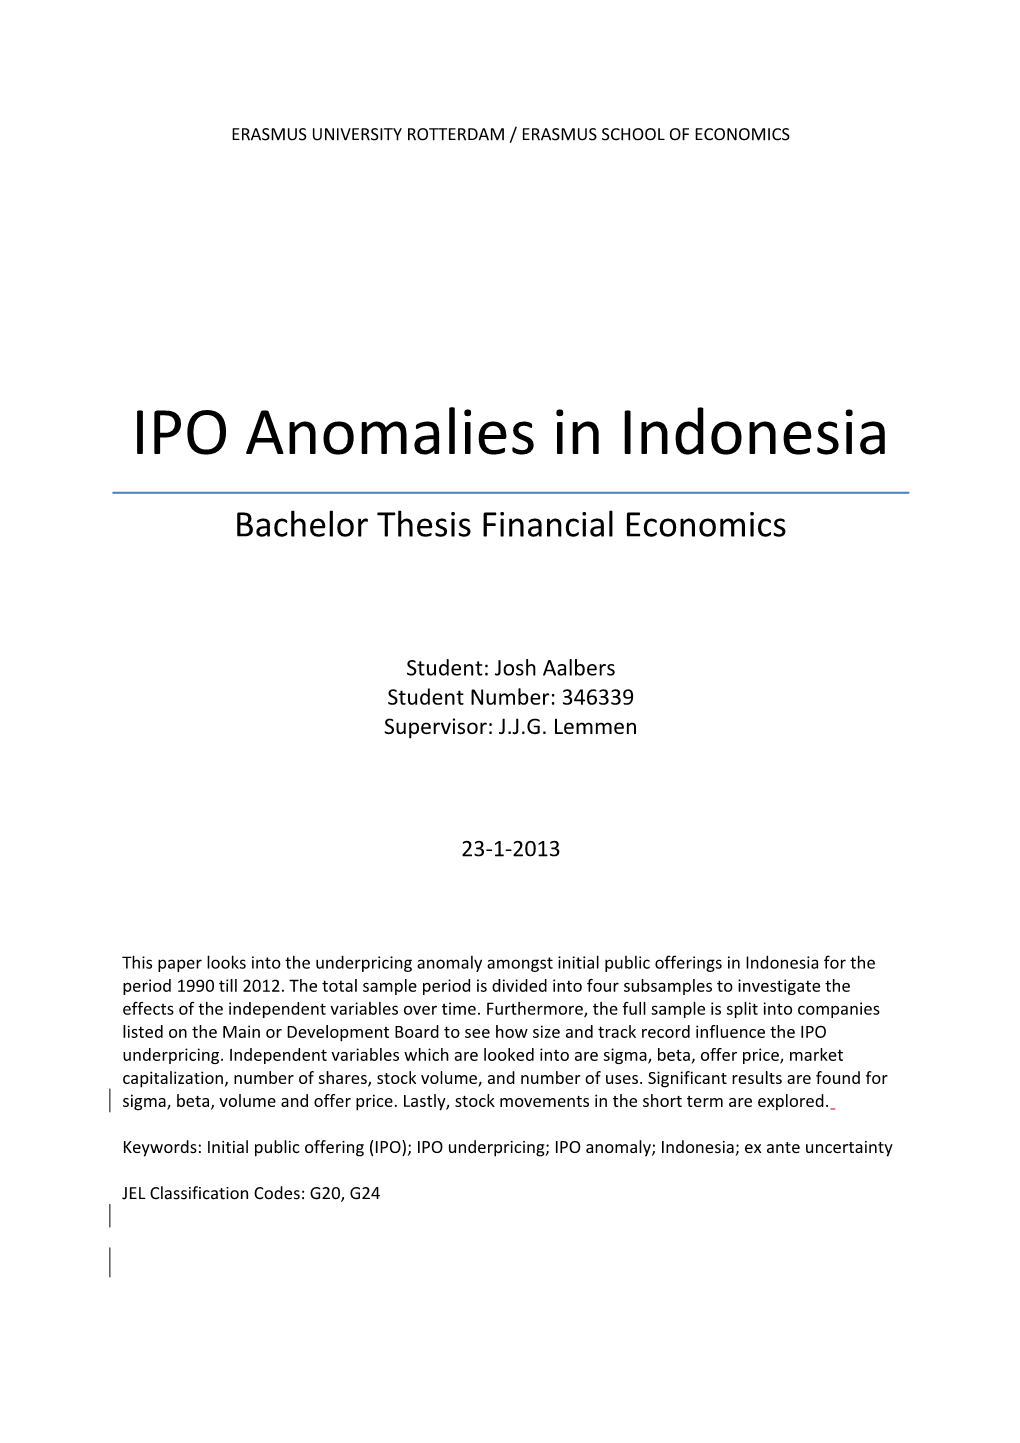 IPO Anomalies in Indonesia